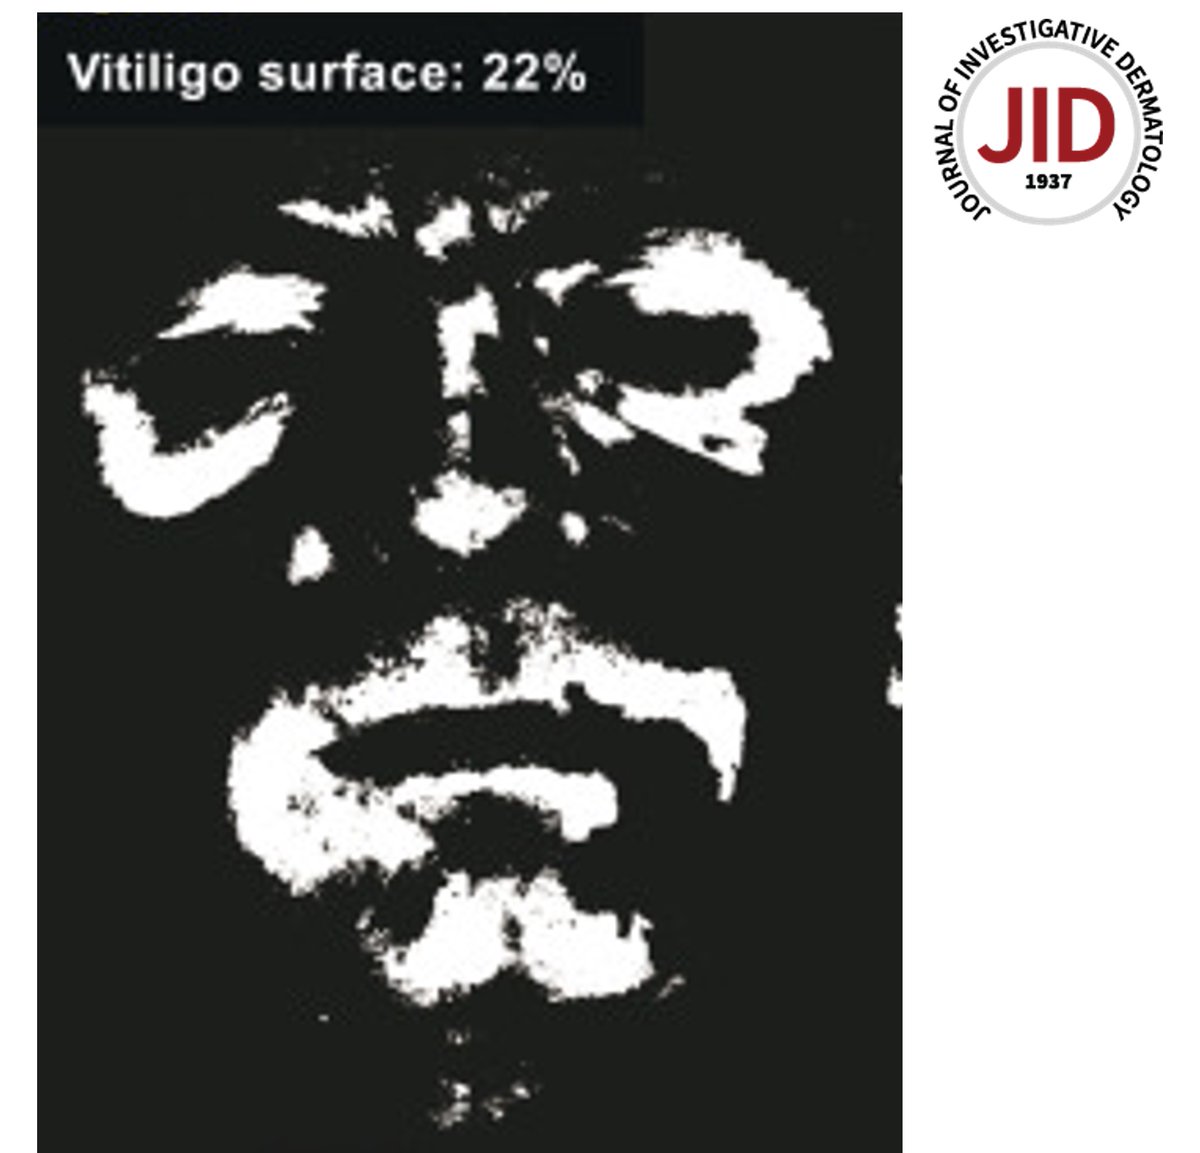 This study provides a reliable and objective tool to assess facial #vitiligo severity with a mixed clinical and #artificialintelligence approach, reports Hillmer et al. doi.org/10.1016/j.jid.… #derm #dermatology #dermatologist #dermatologists #dermatologia #dermatologie #AI